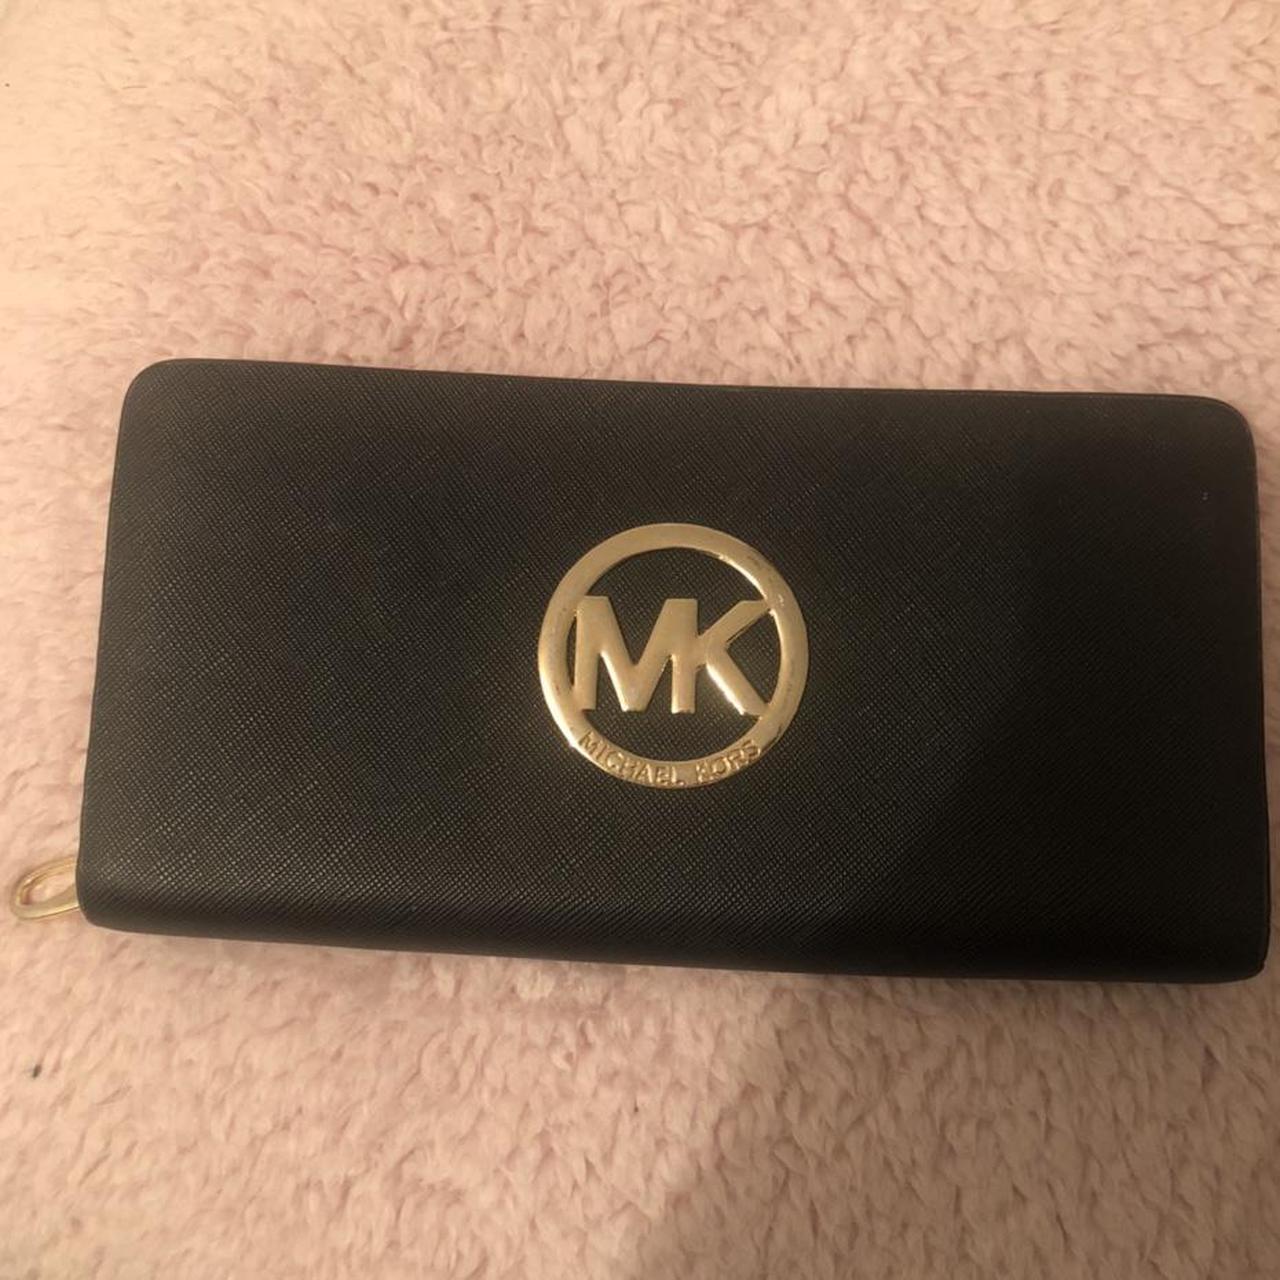 Product Image 1 - black/gold/red michael kors purse wallet❤️‍🔥
bought